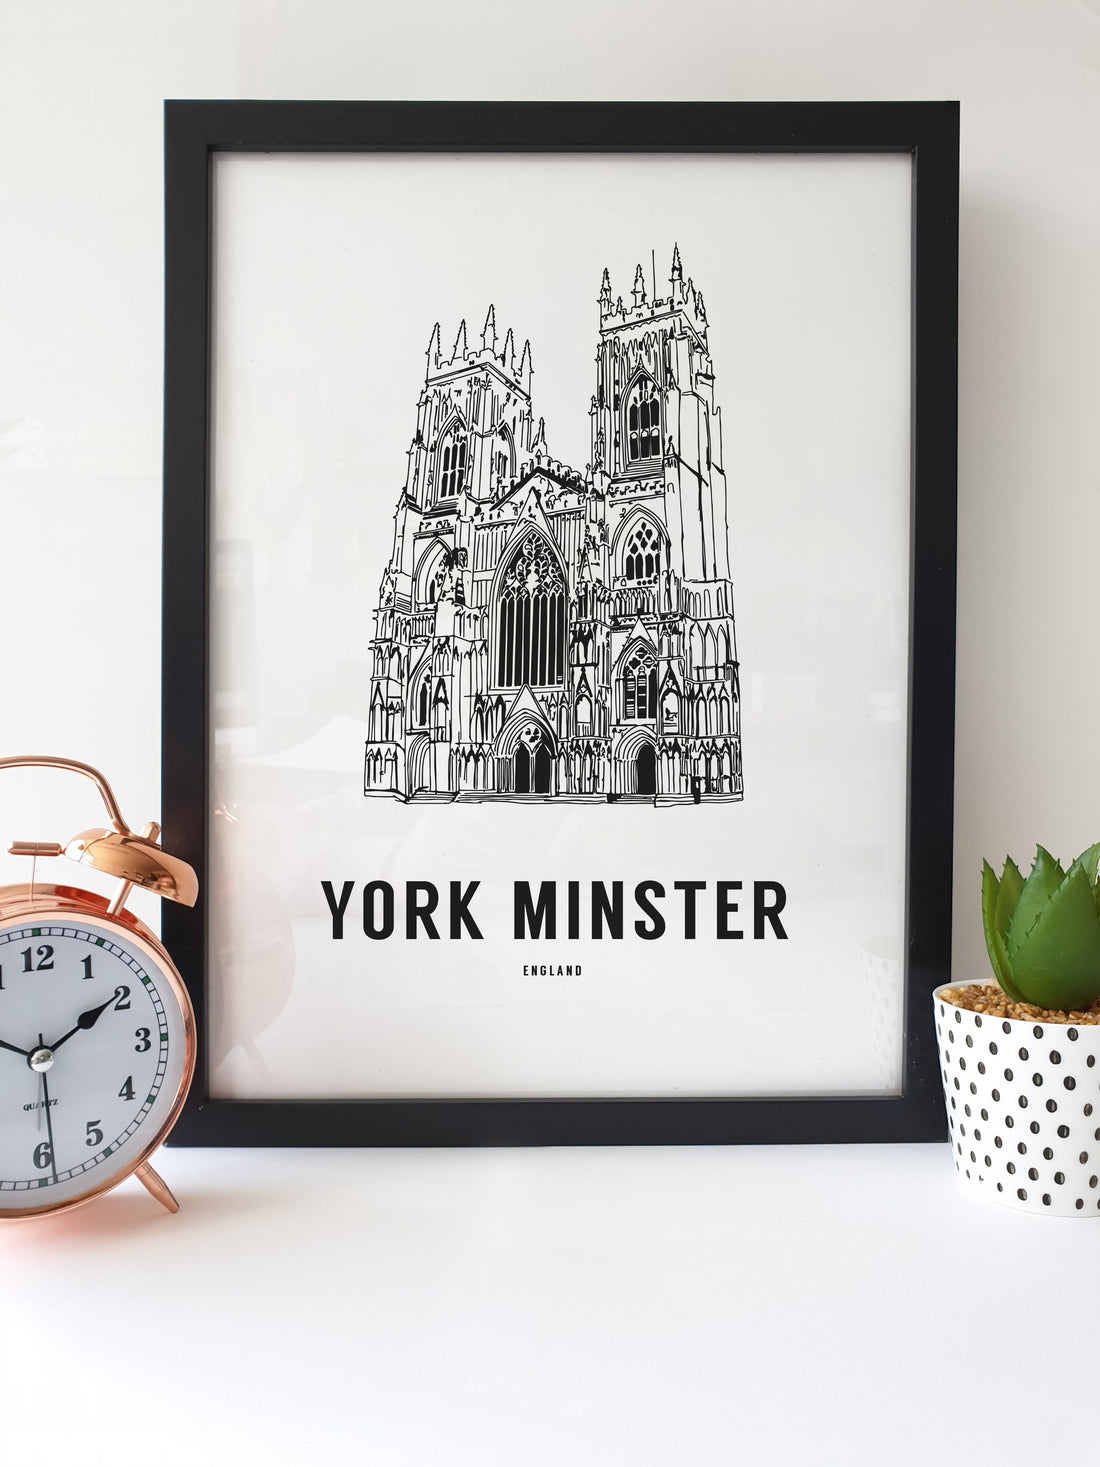 High quality hand drawn illustrated print  Yorkshire born and bred? Or simply love visiting the beautiful city of York? We've designed this unique print featuring the famous York Minster.